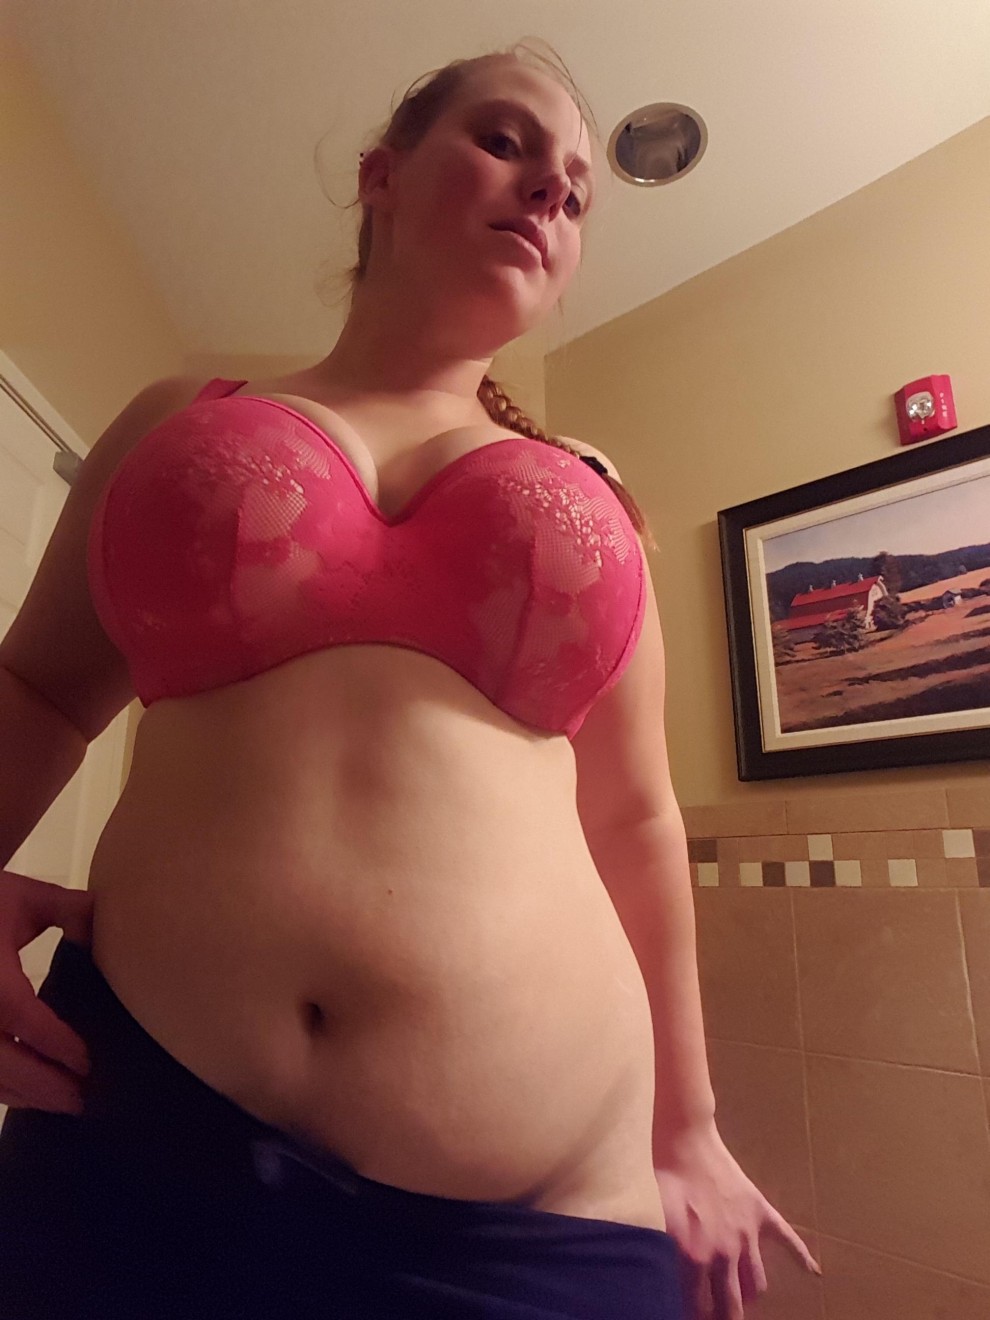 I have [f]un teasing you.